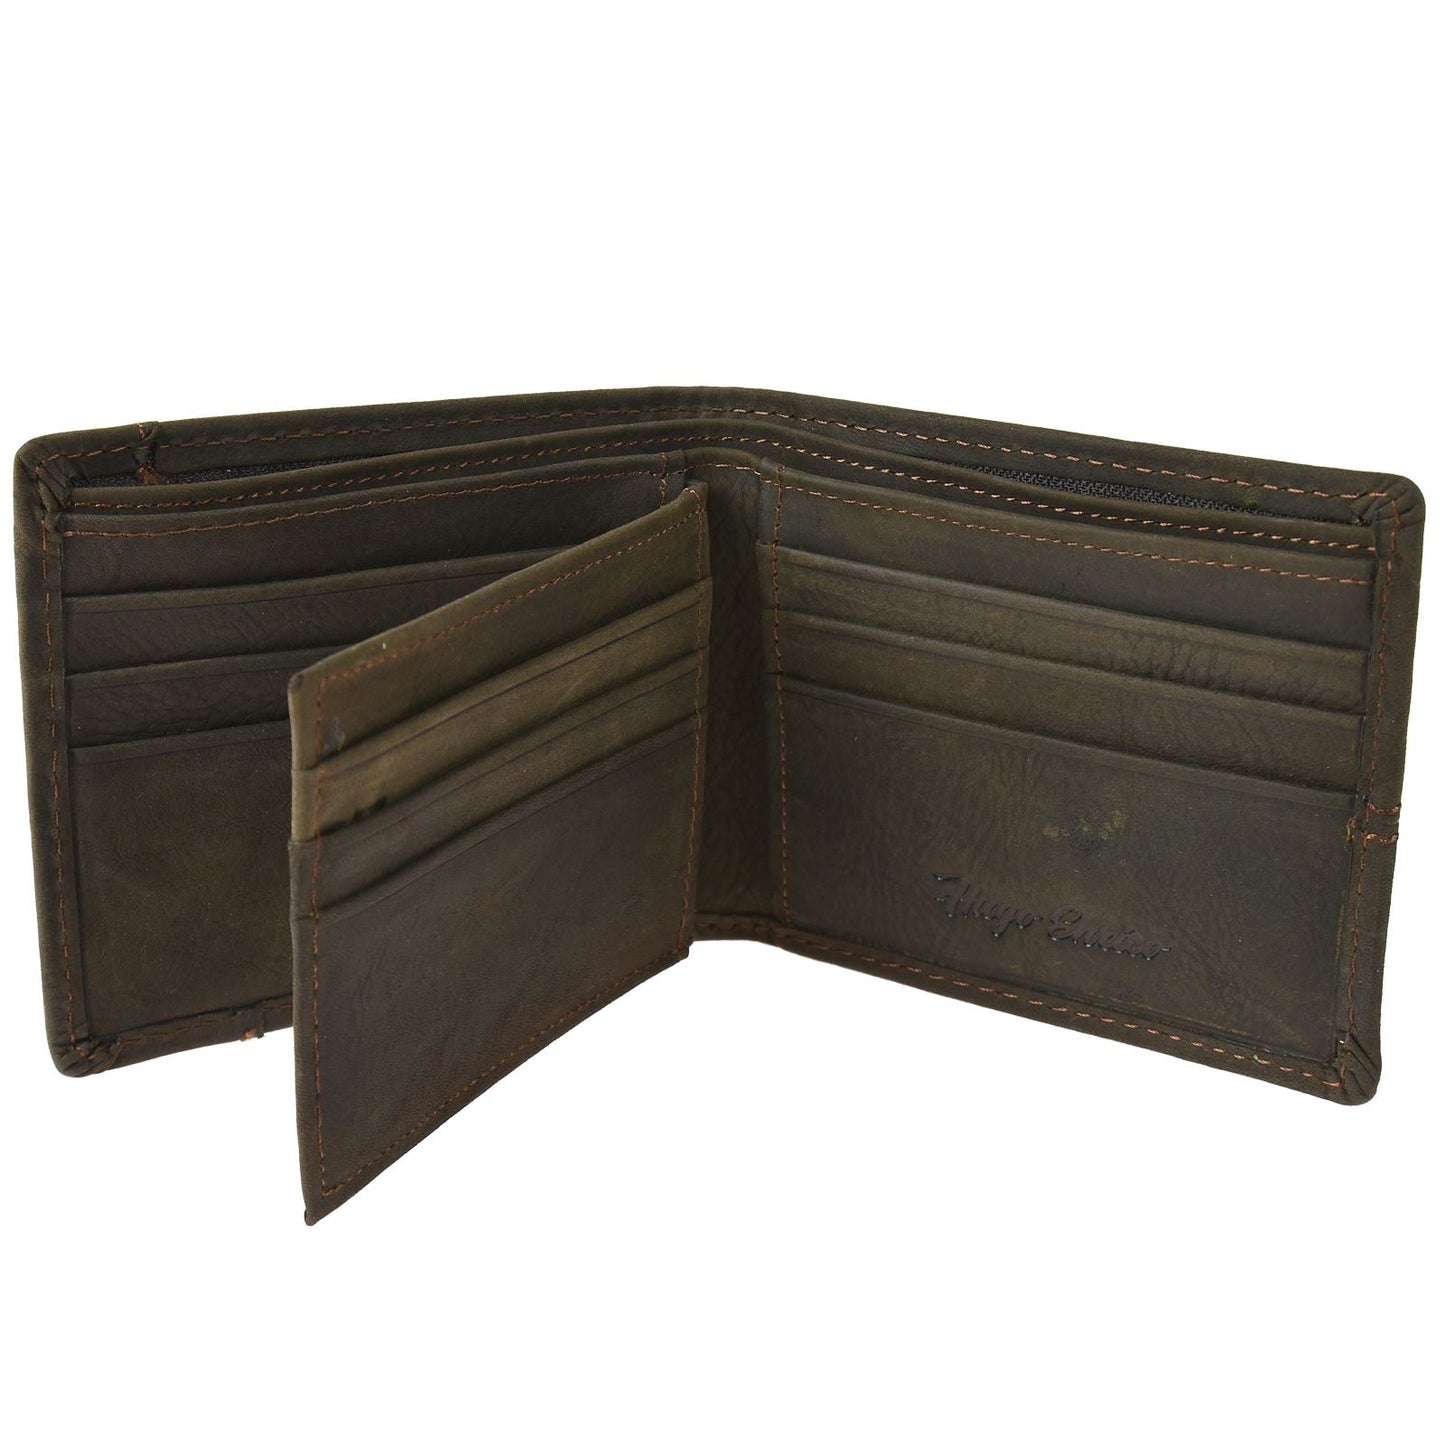 Double the Style with a Front Stitch Wallet